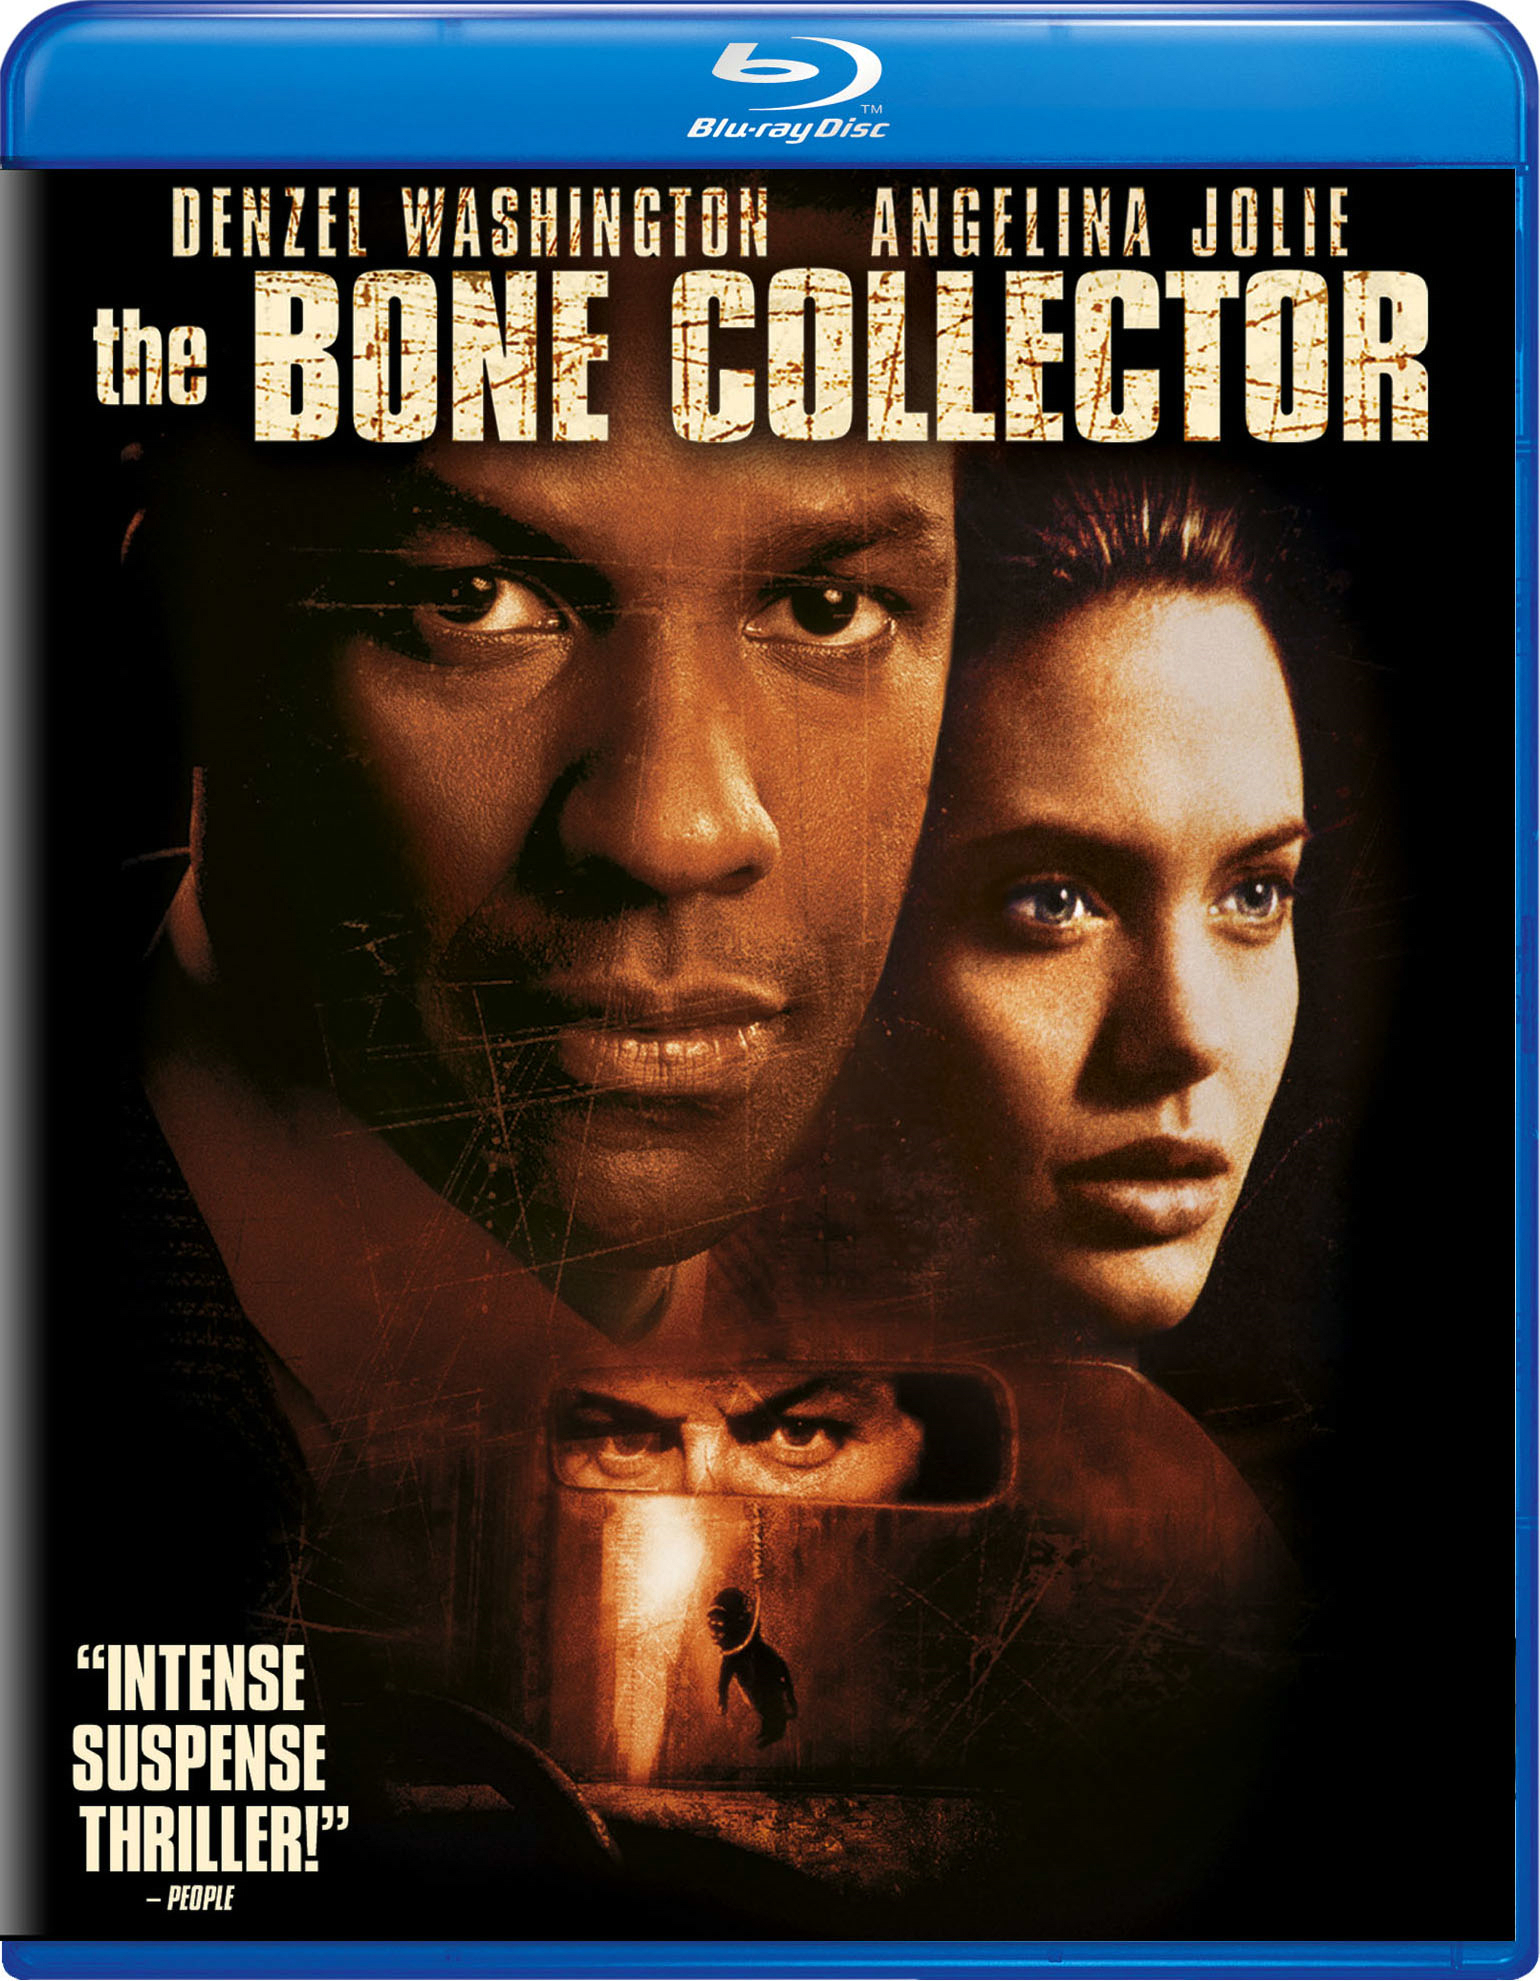 The Bone Collector - Blu-ray [ 1999 ]  - Thriller Movies On Blu-ray - Movies On GRUV